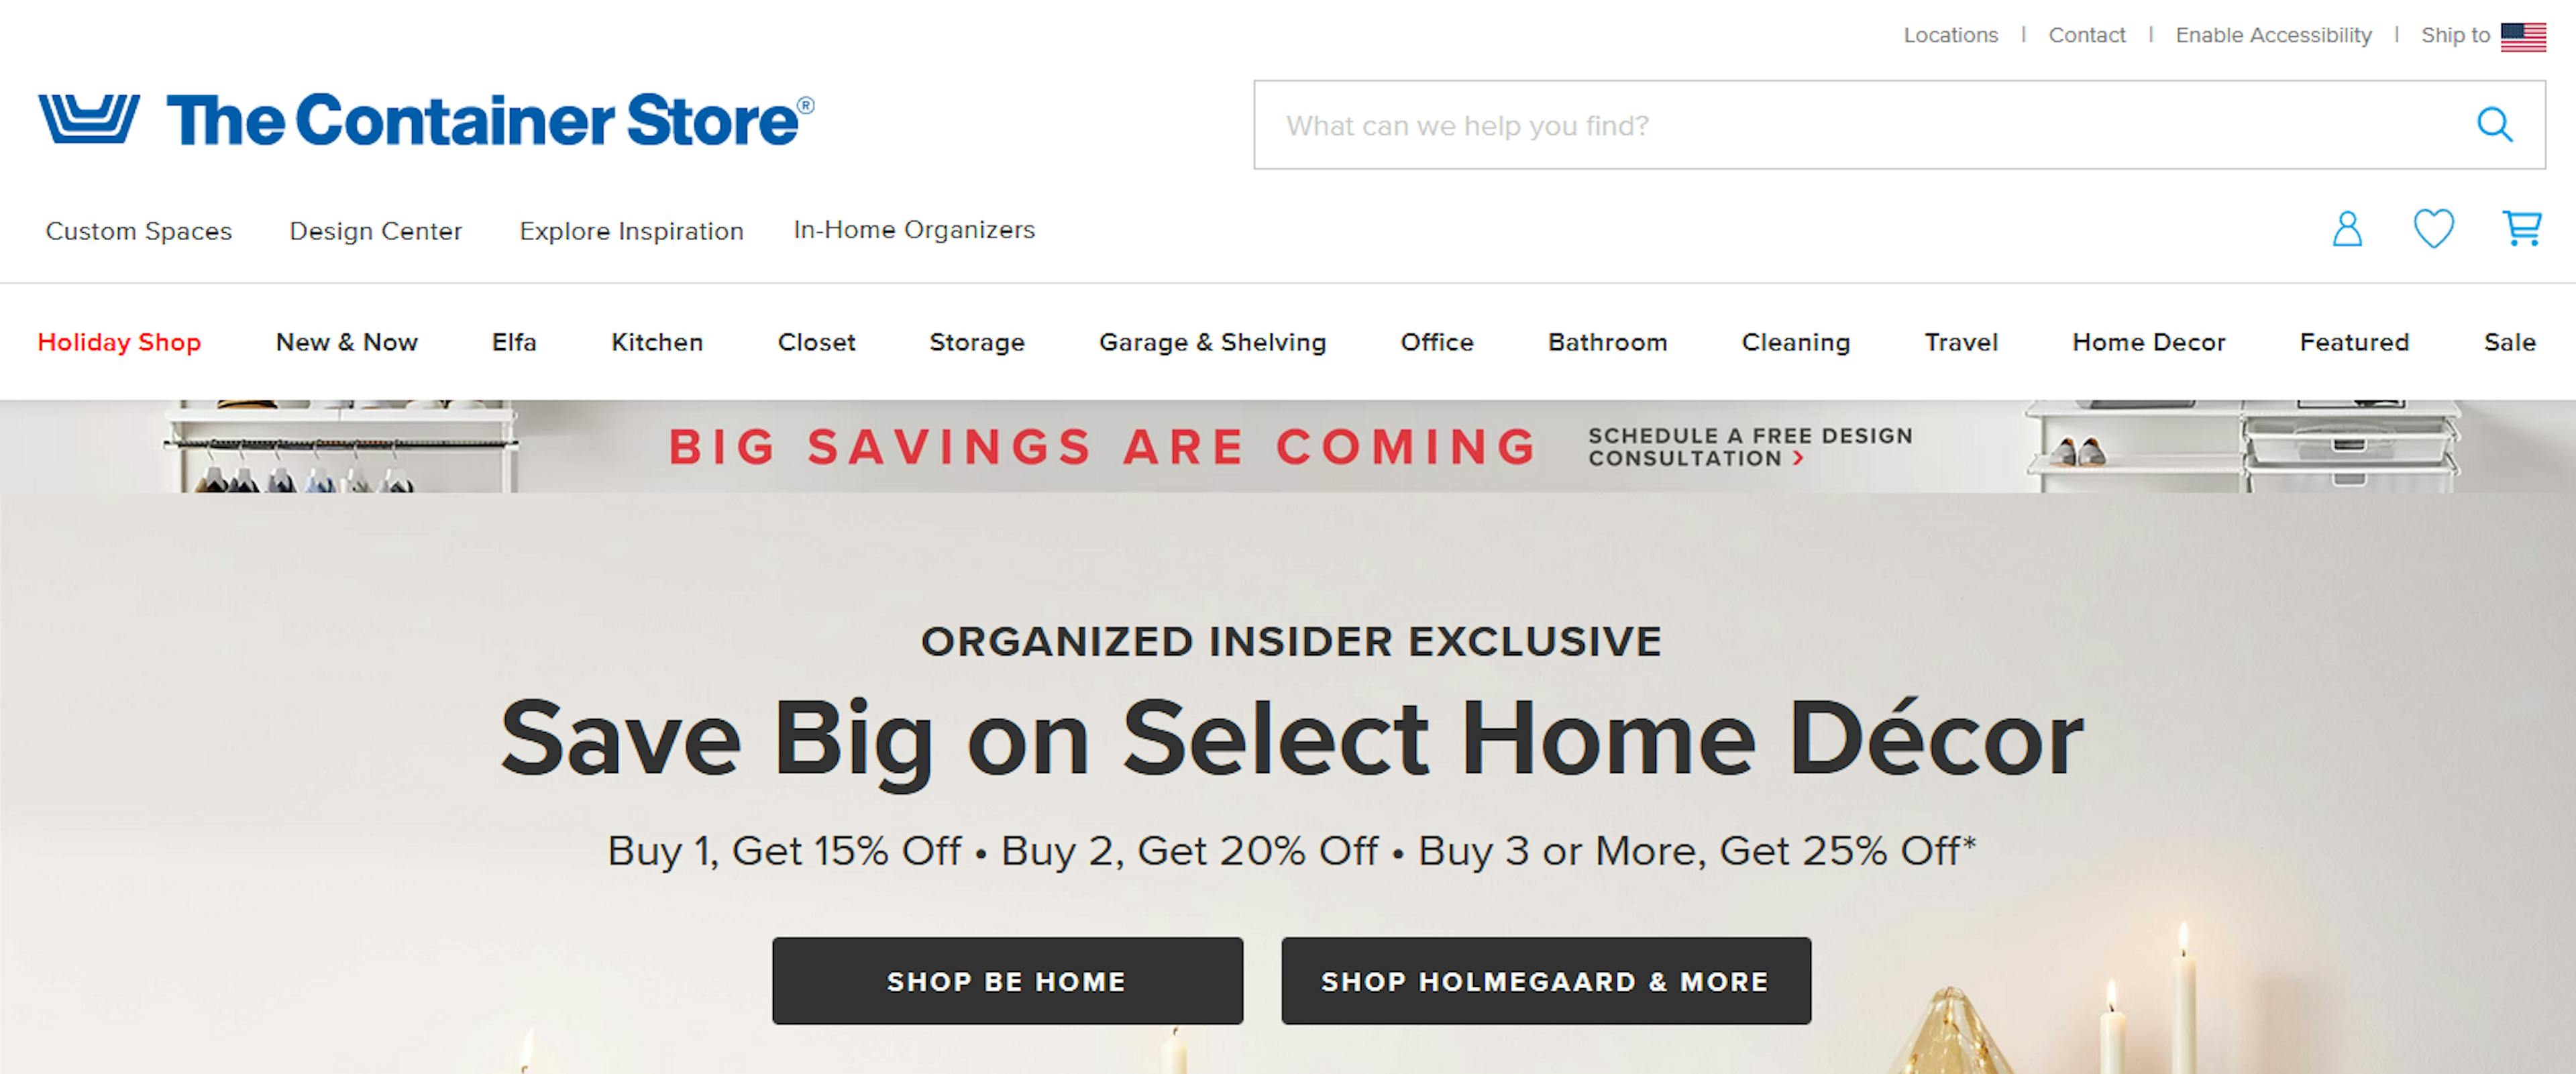 An image of the Container Store website.